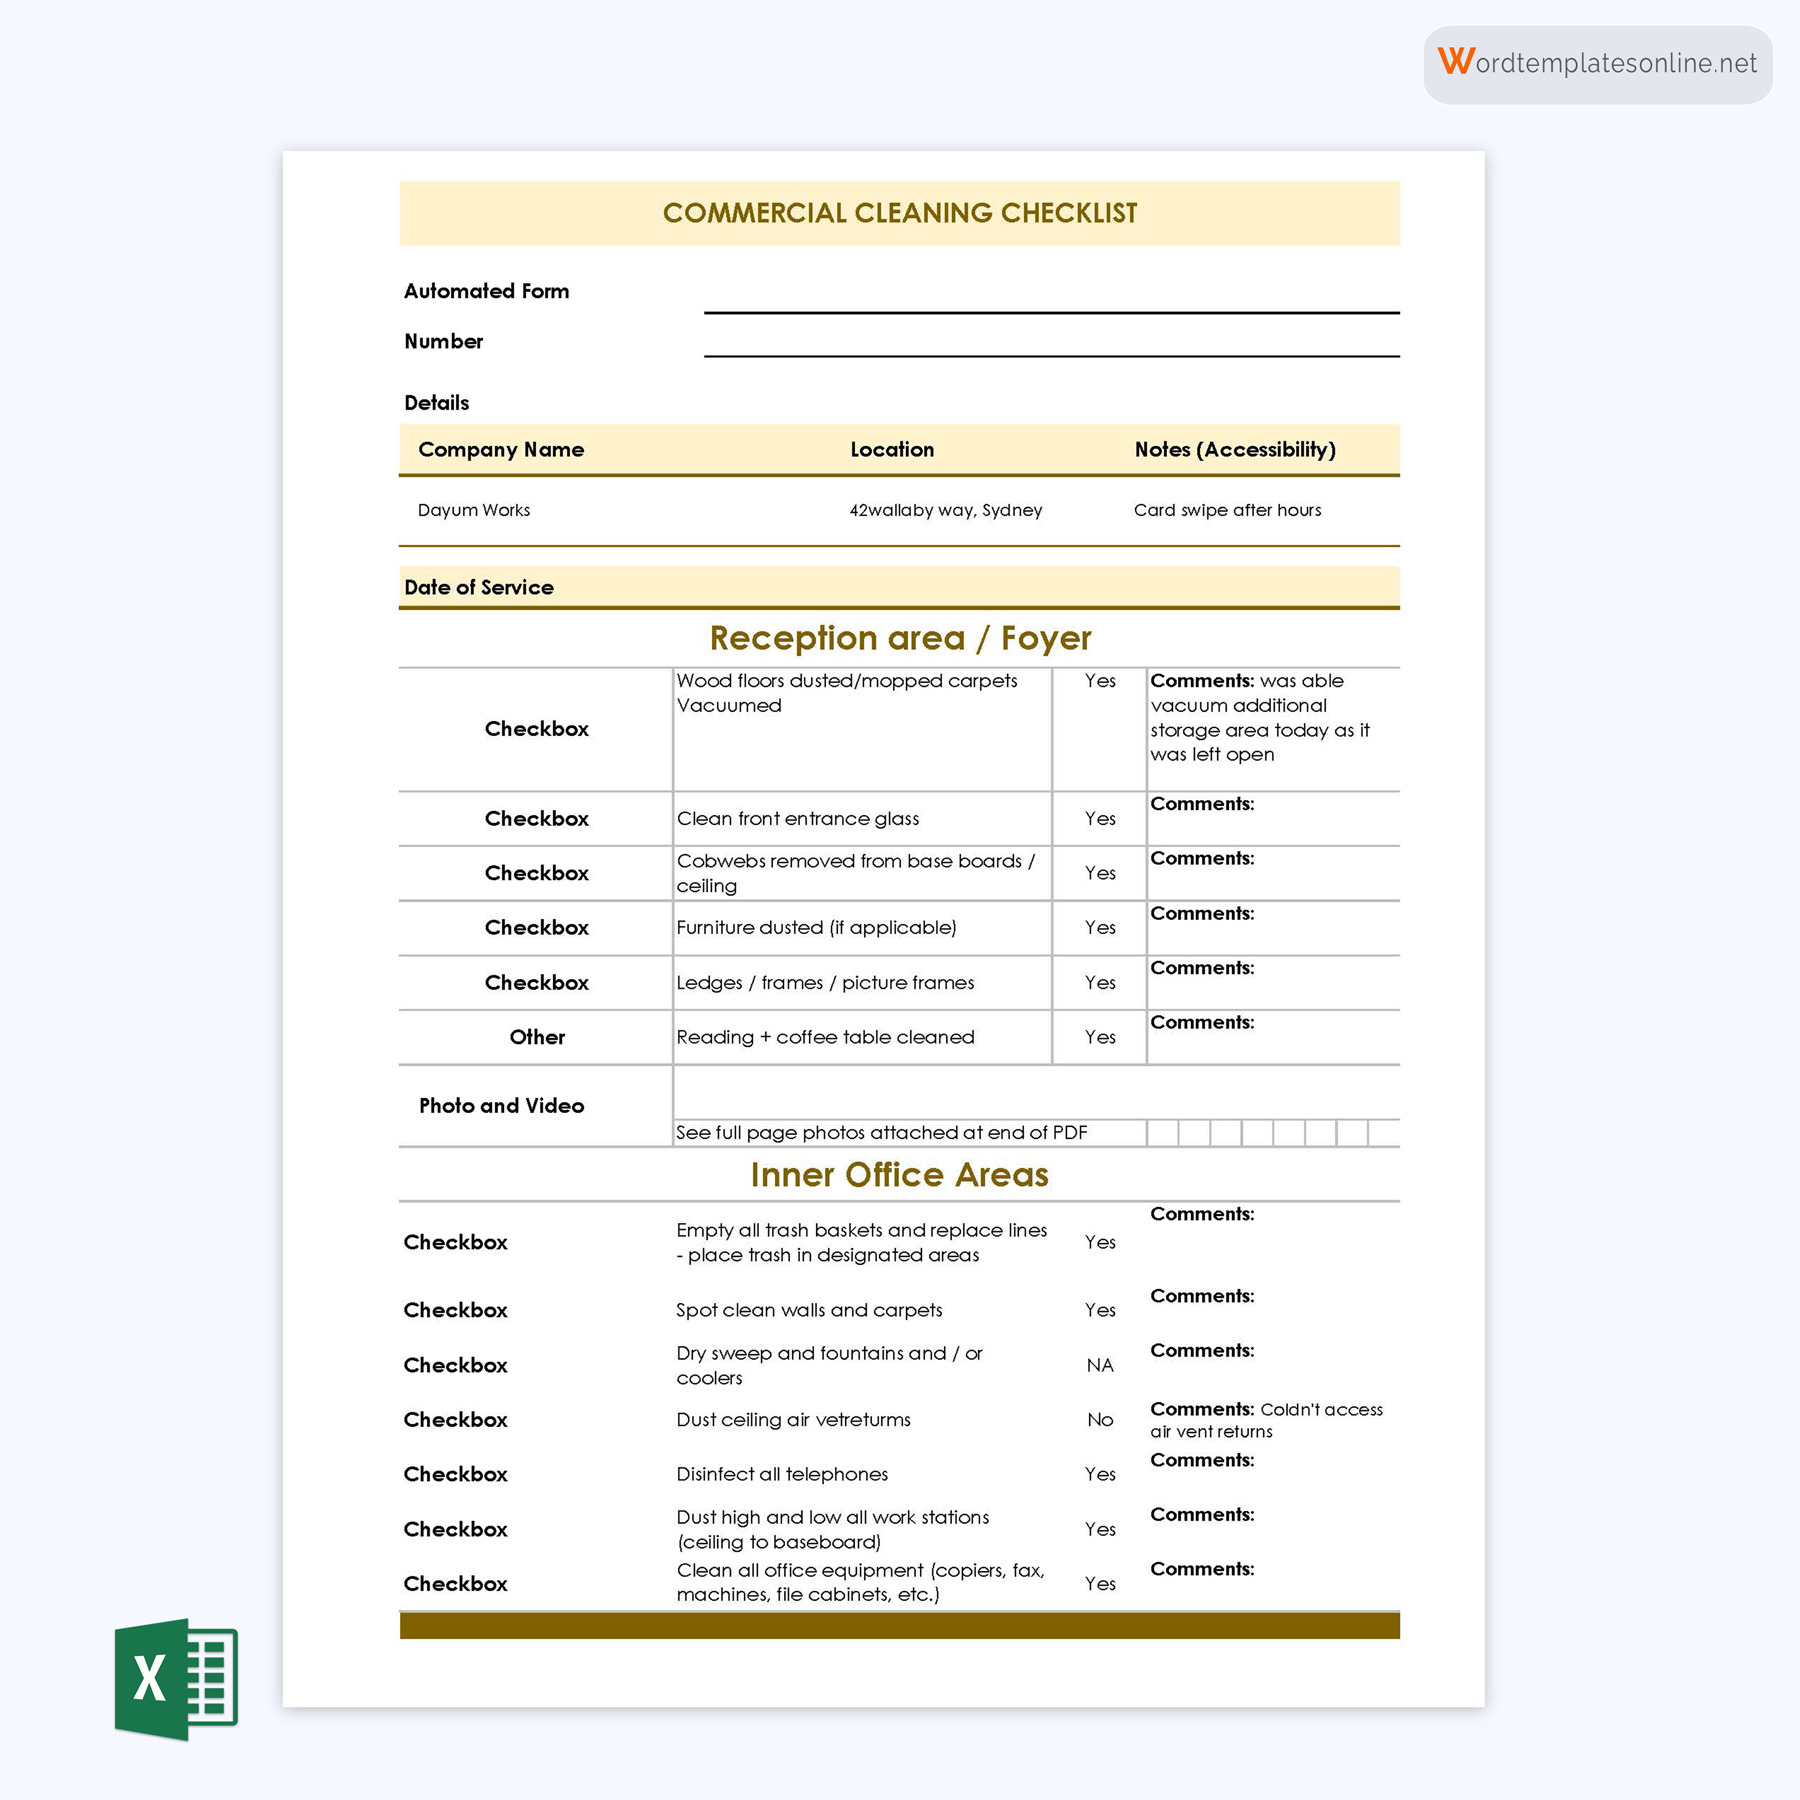 Sample Commercial Cleaning Checklist Format